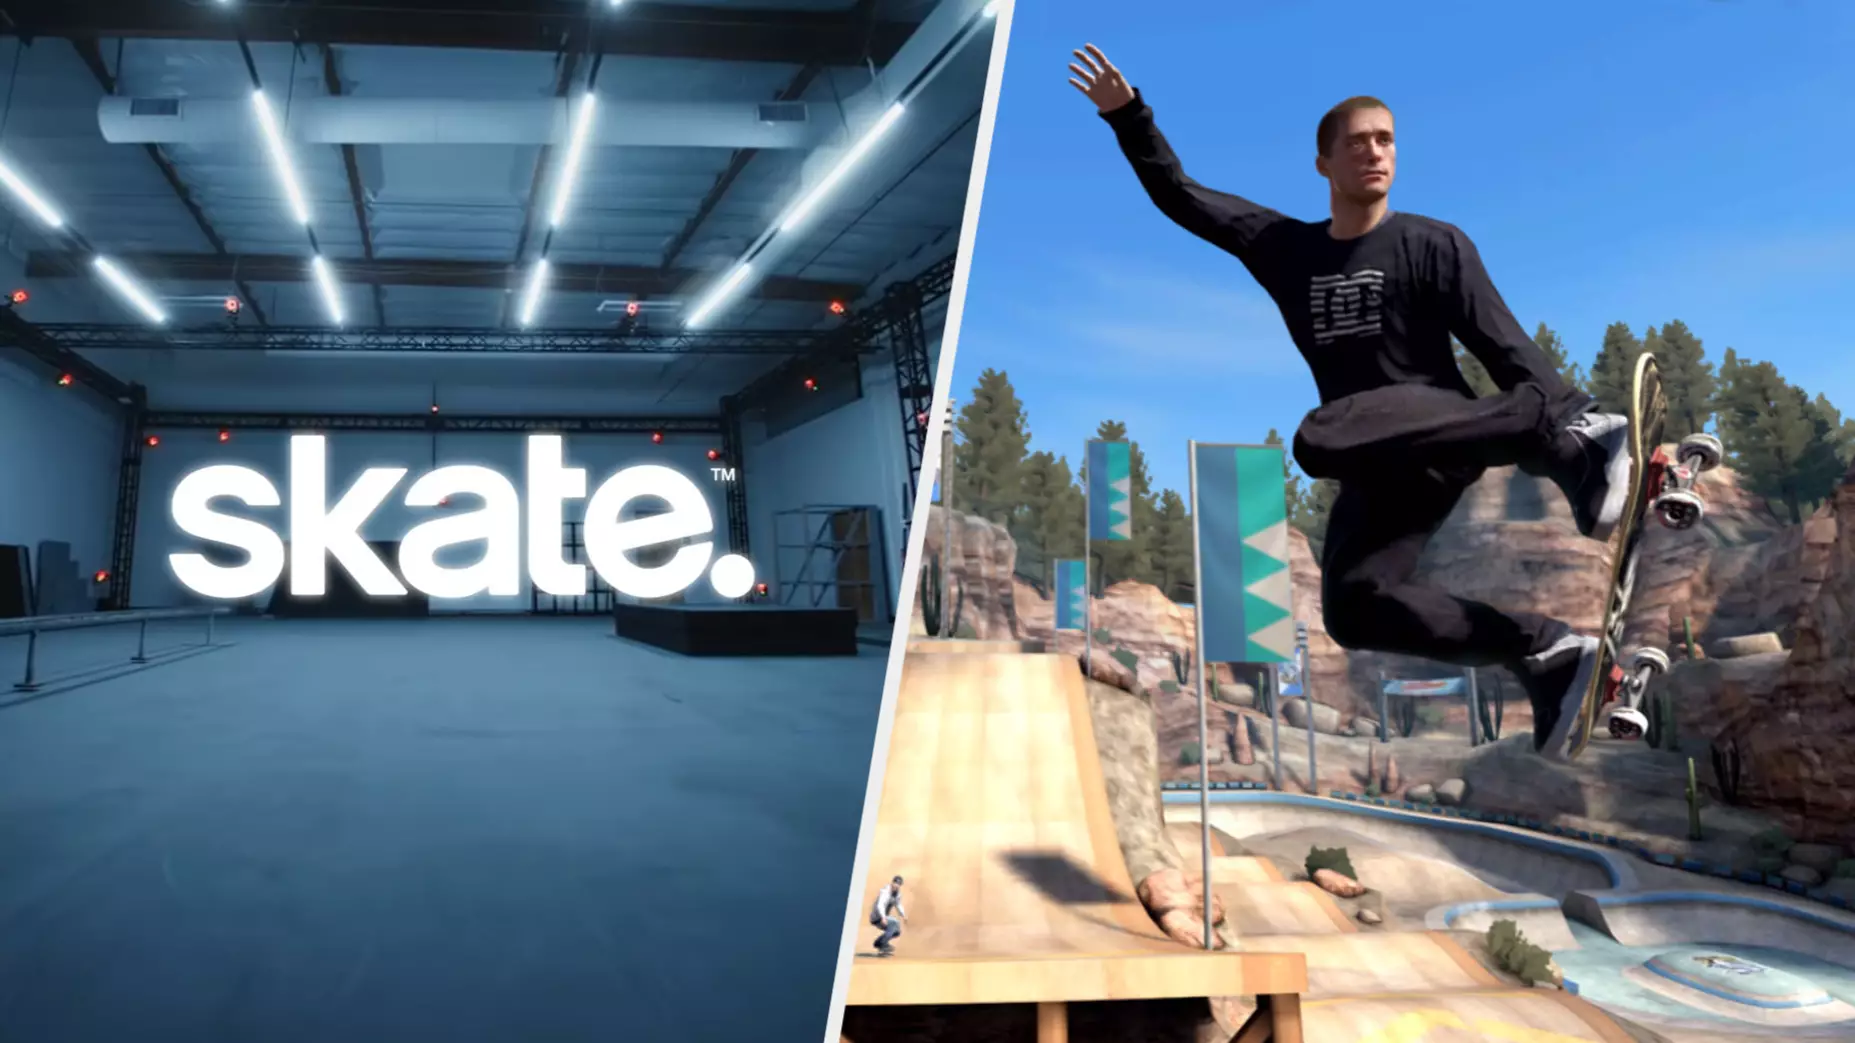 EA Finally Drops 'Skate 4' Teaser Trailer, But The Game Is Still A Way Off